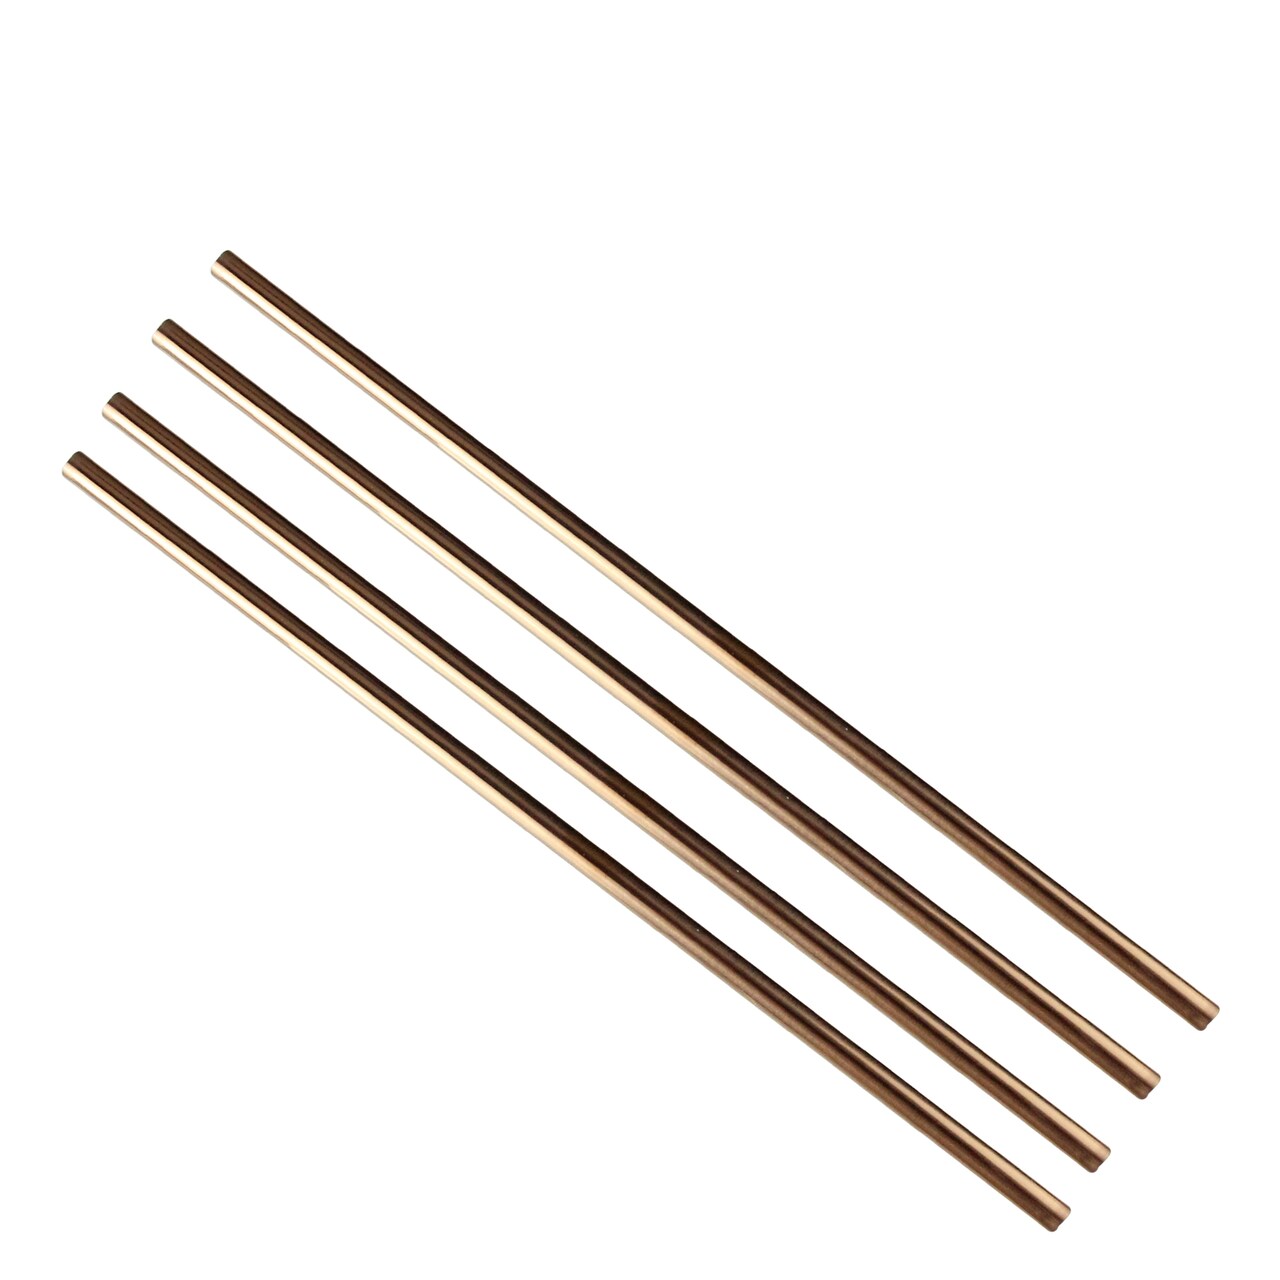 Wild Eye Set of 4 Handcrafted Antique Copper Stainless Steel Re-usable  Drinking Straws 8.5